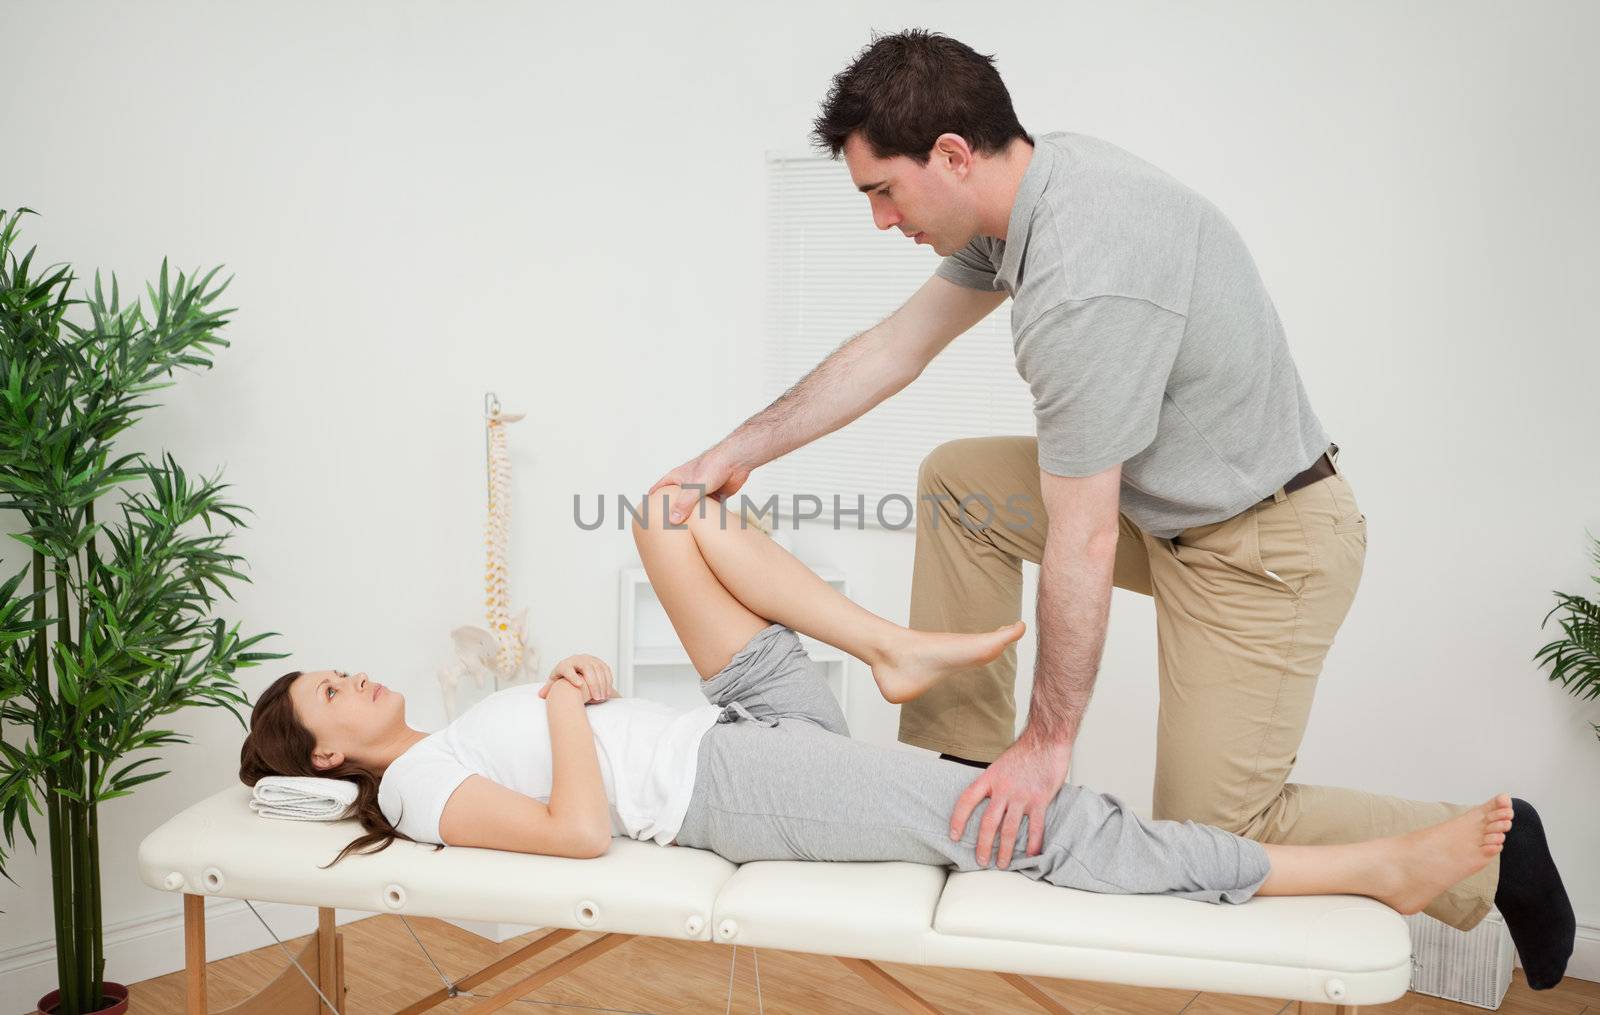 Woman being examining her leg by a chiropractor by Wavebreakmedia